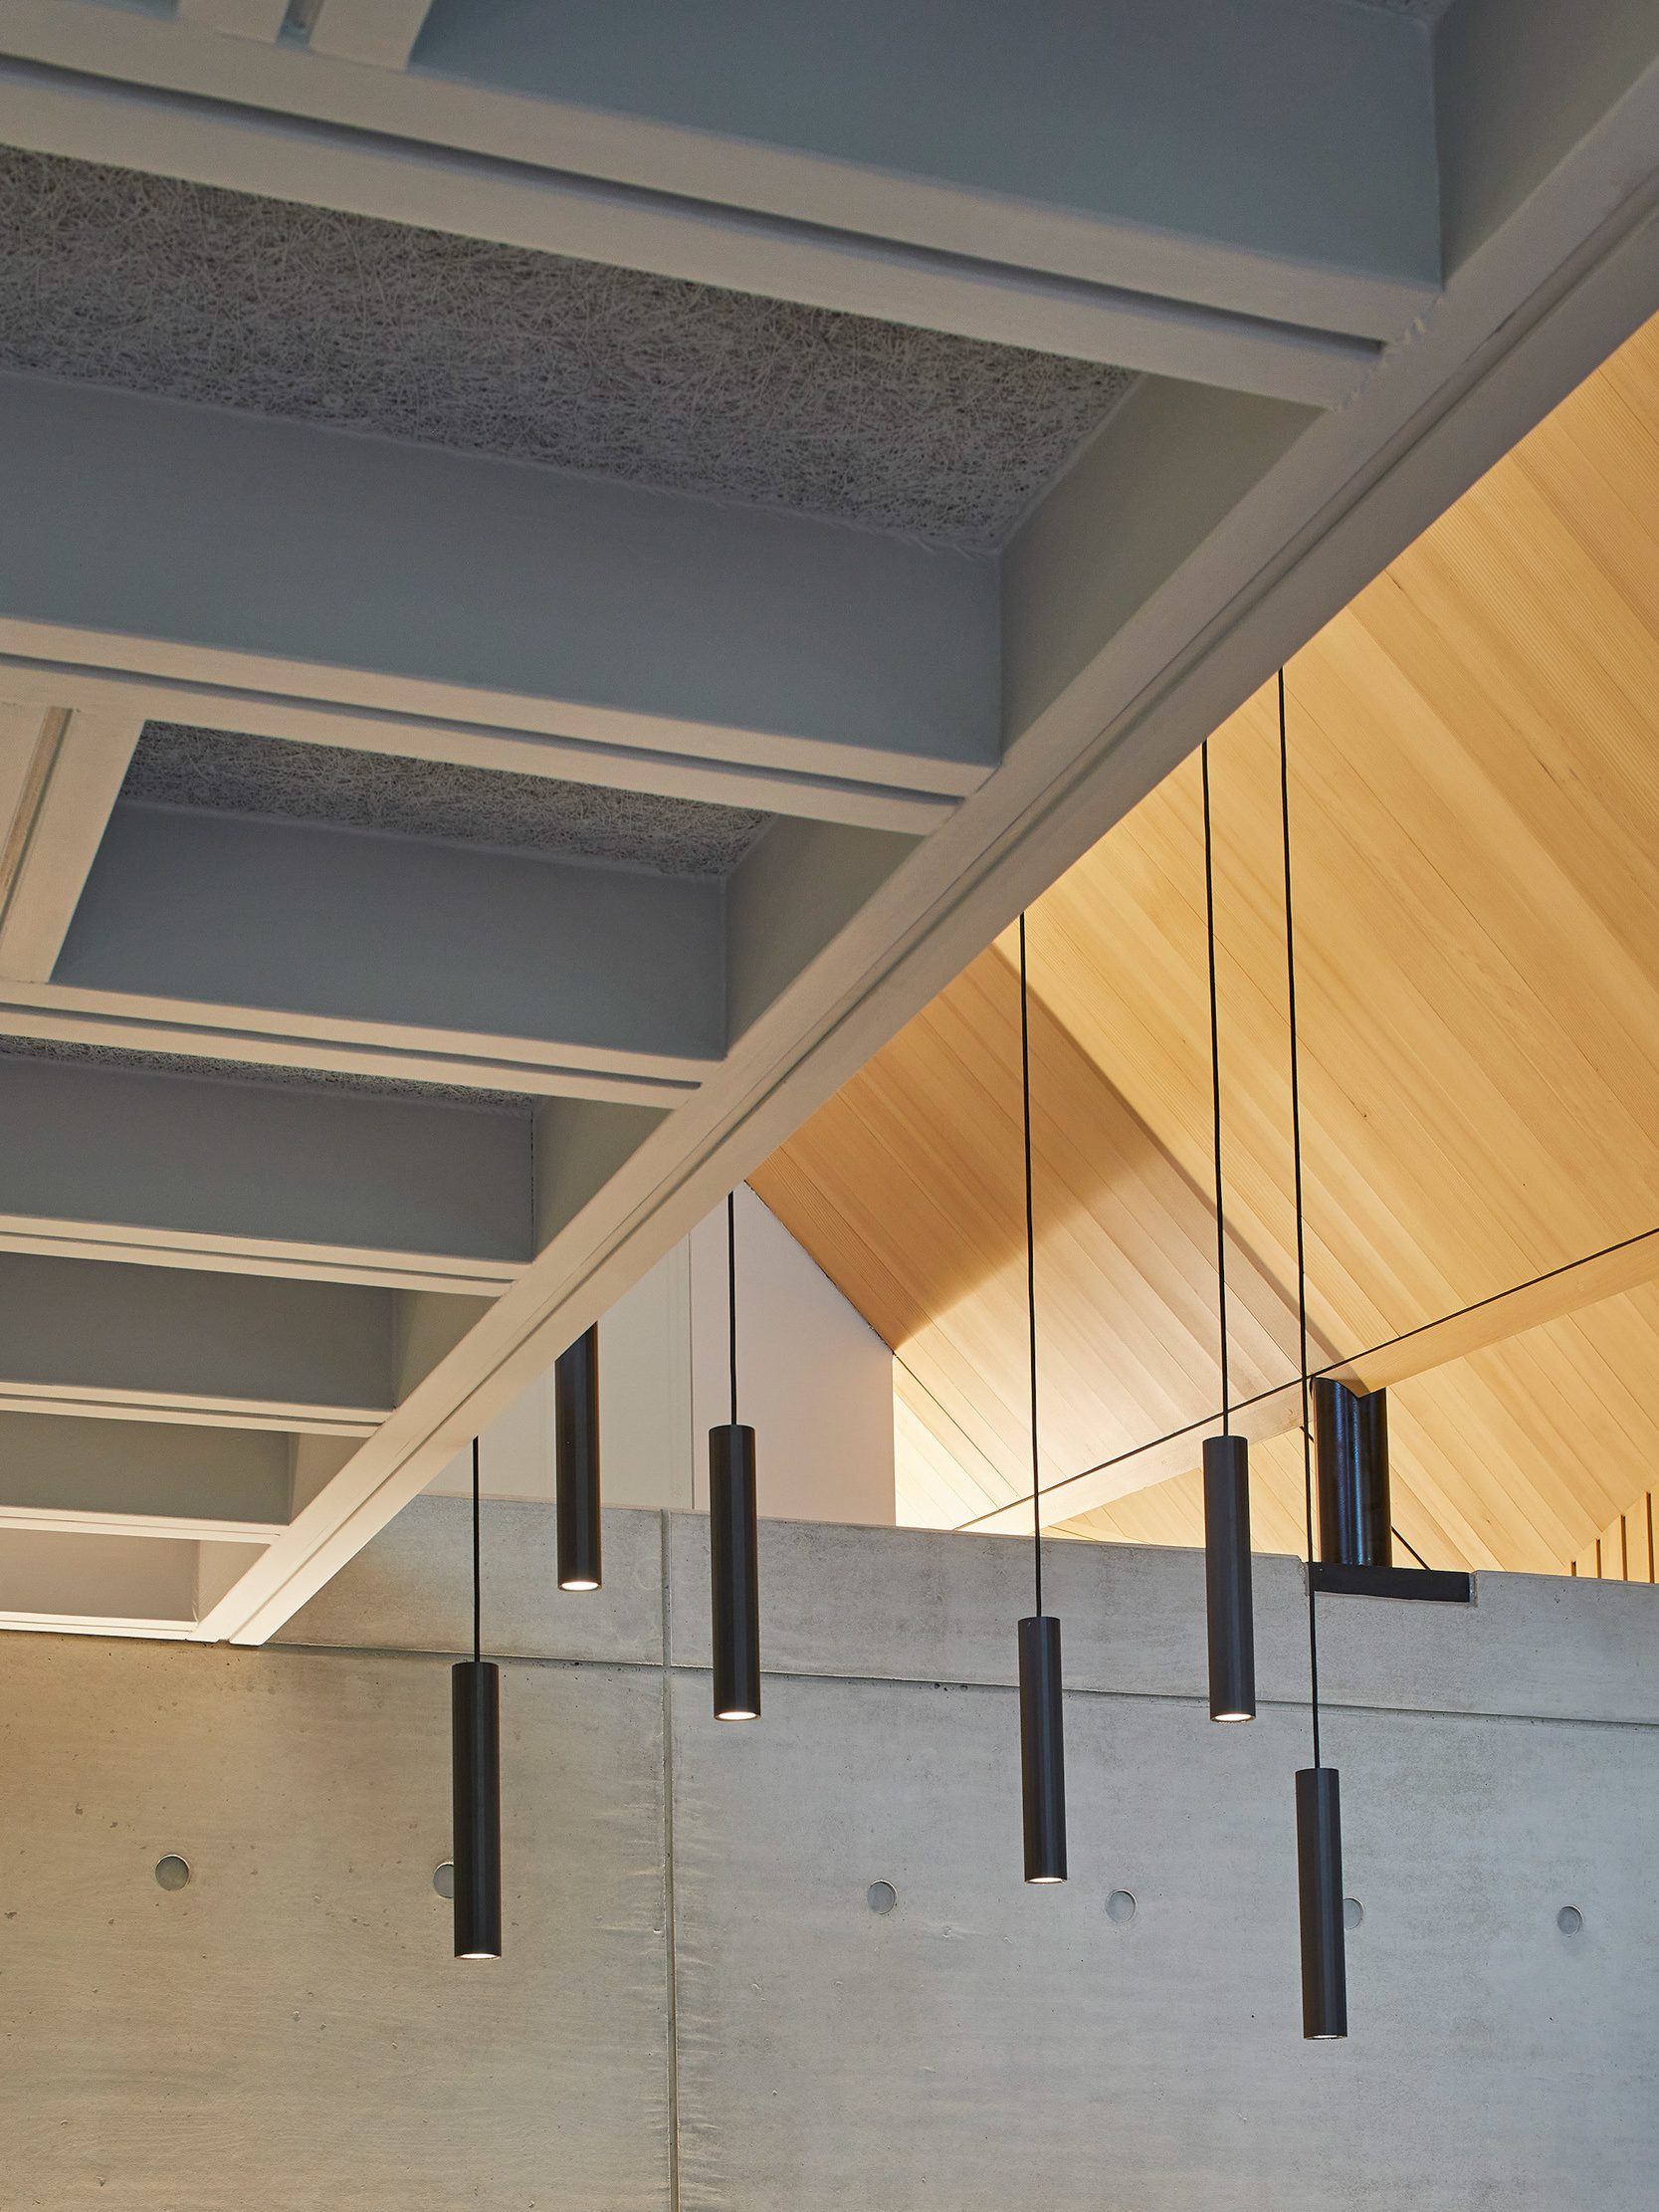 Lights from timber ceiling next to concrete wall in house | cdc studio cambridge architects